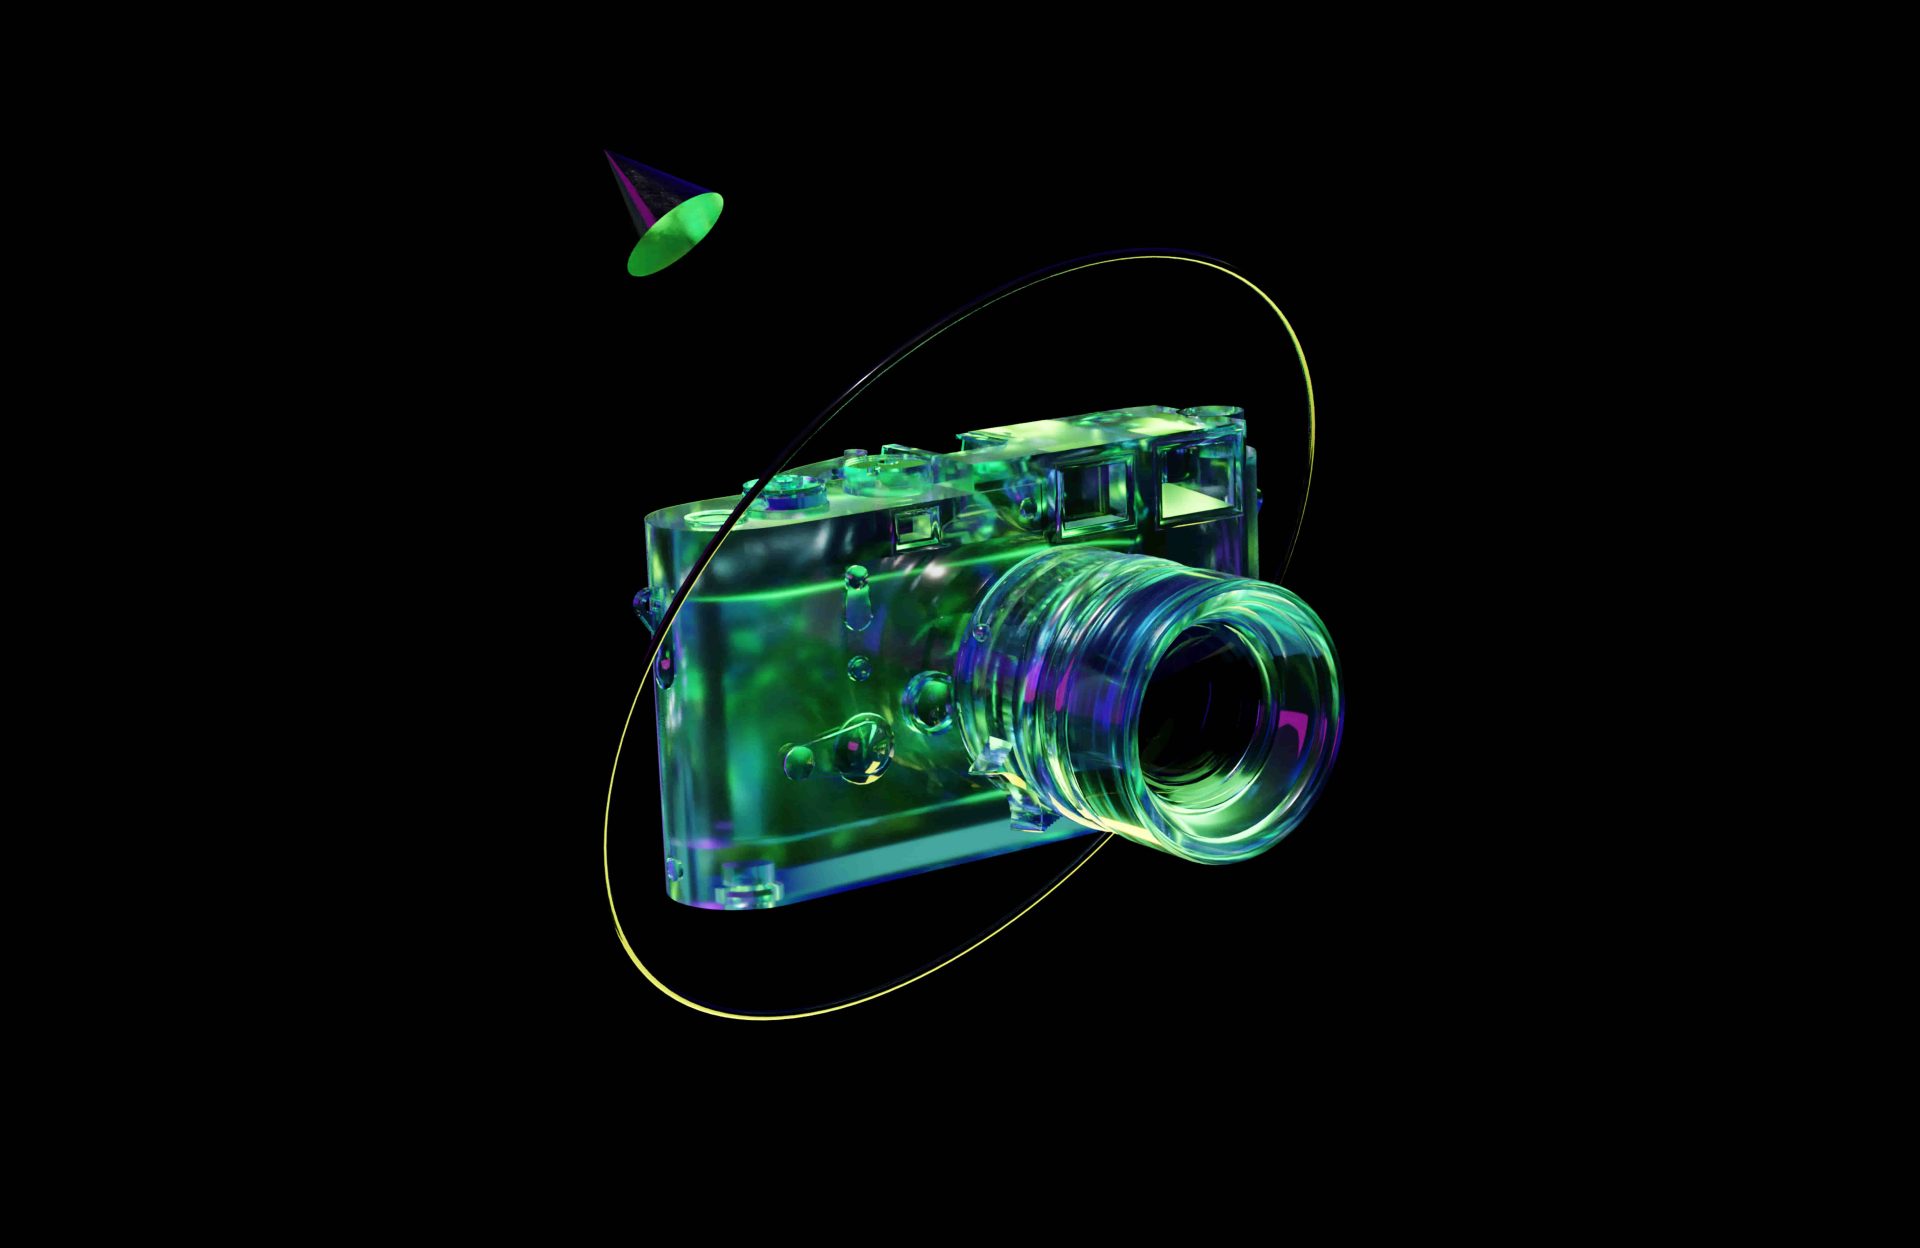 3D animation rendering of a camera